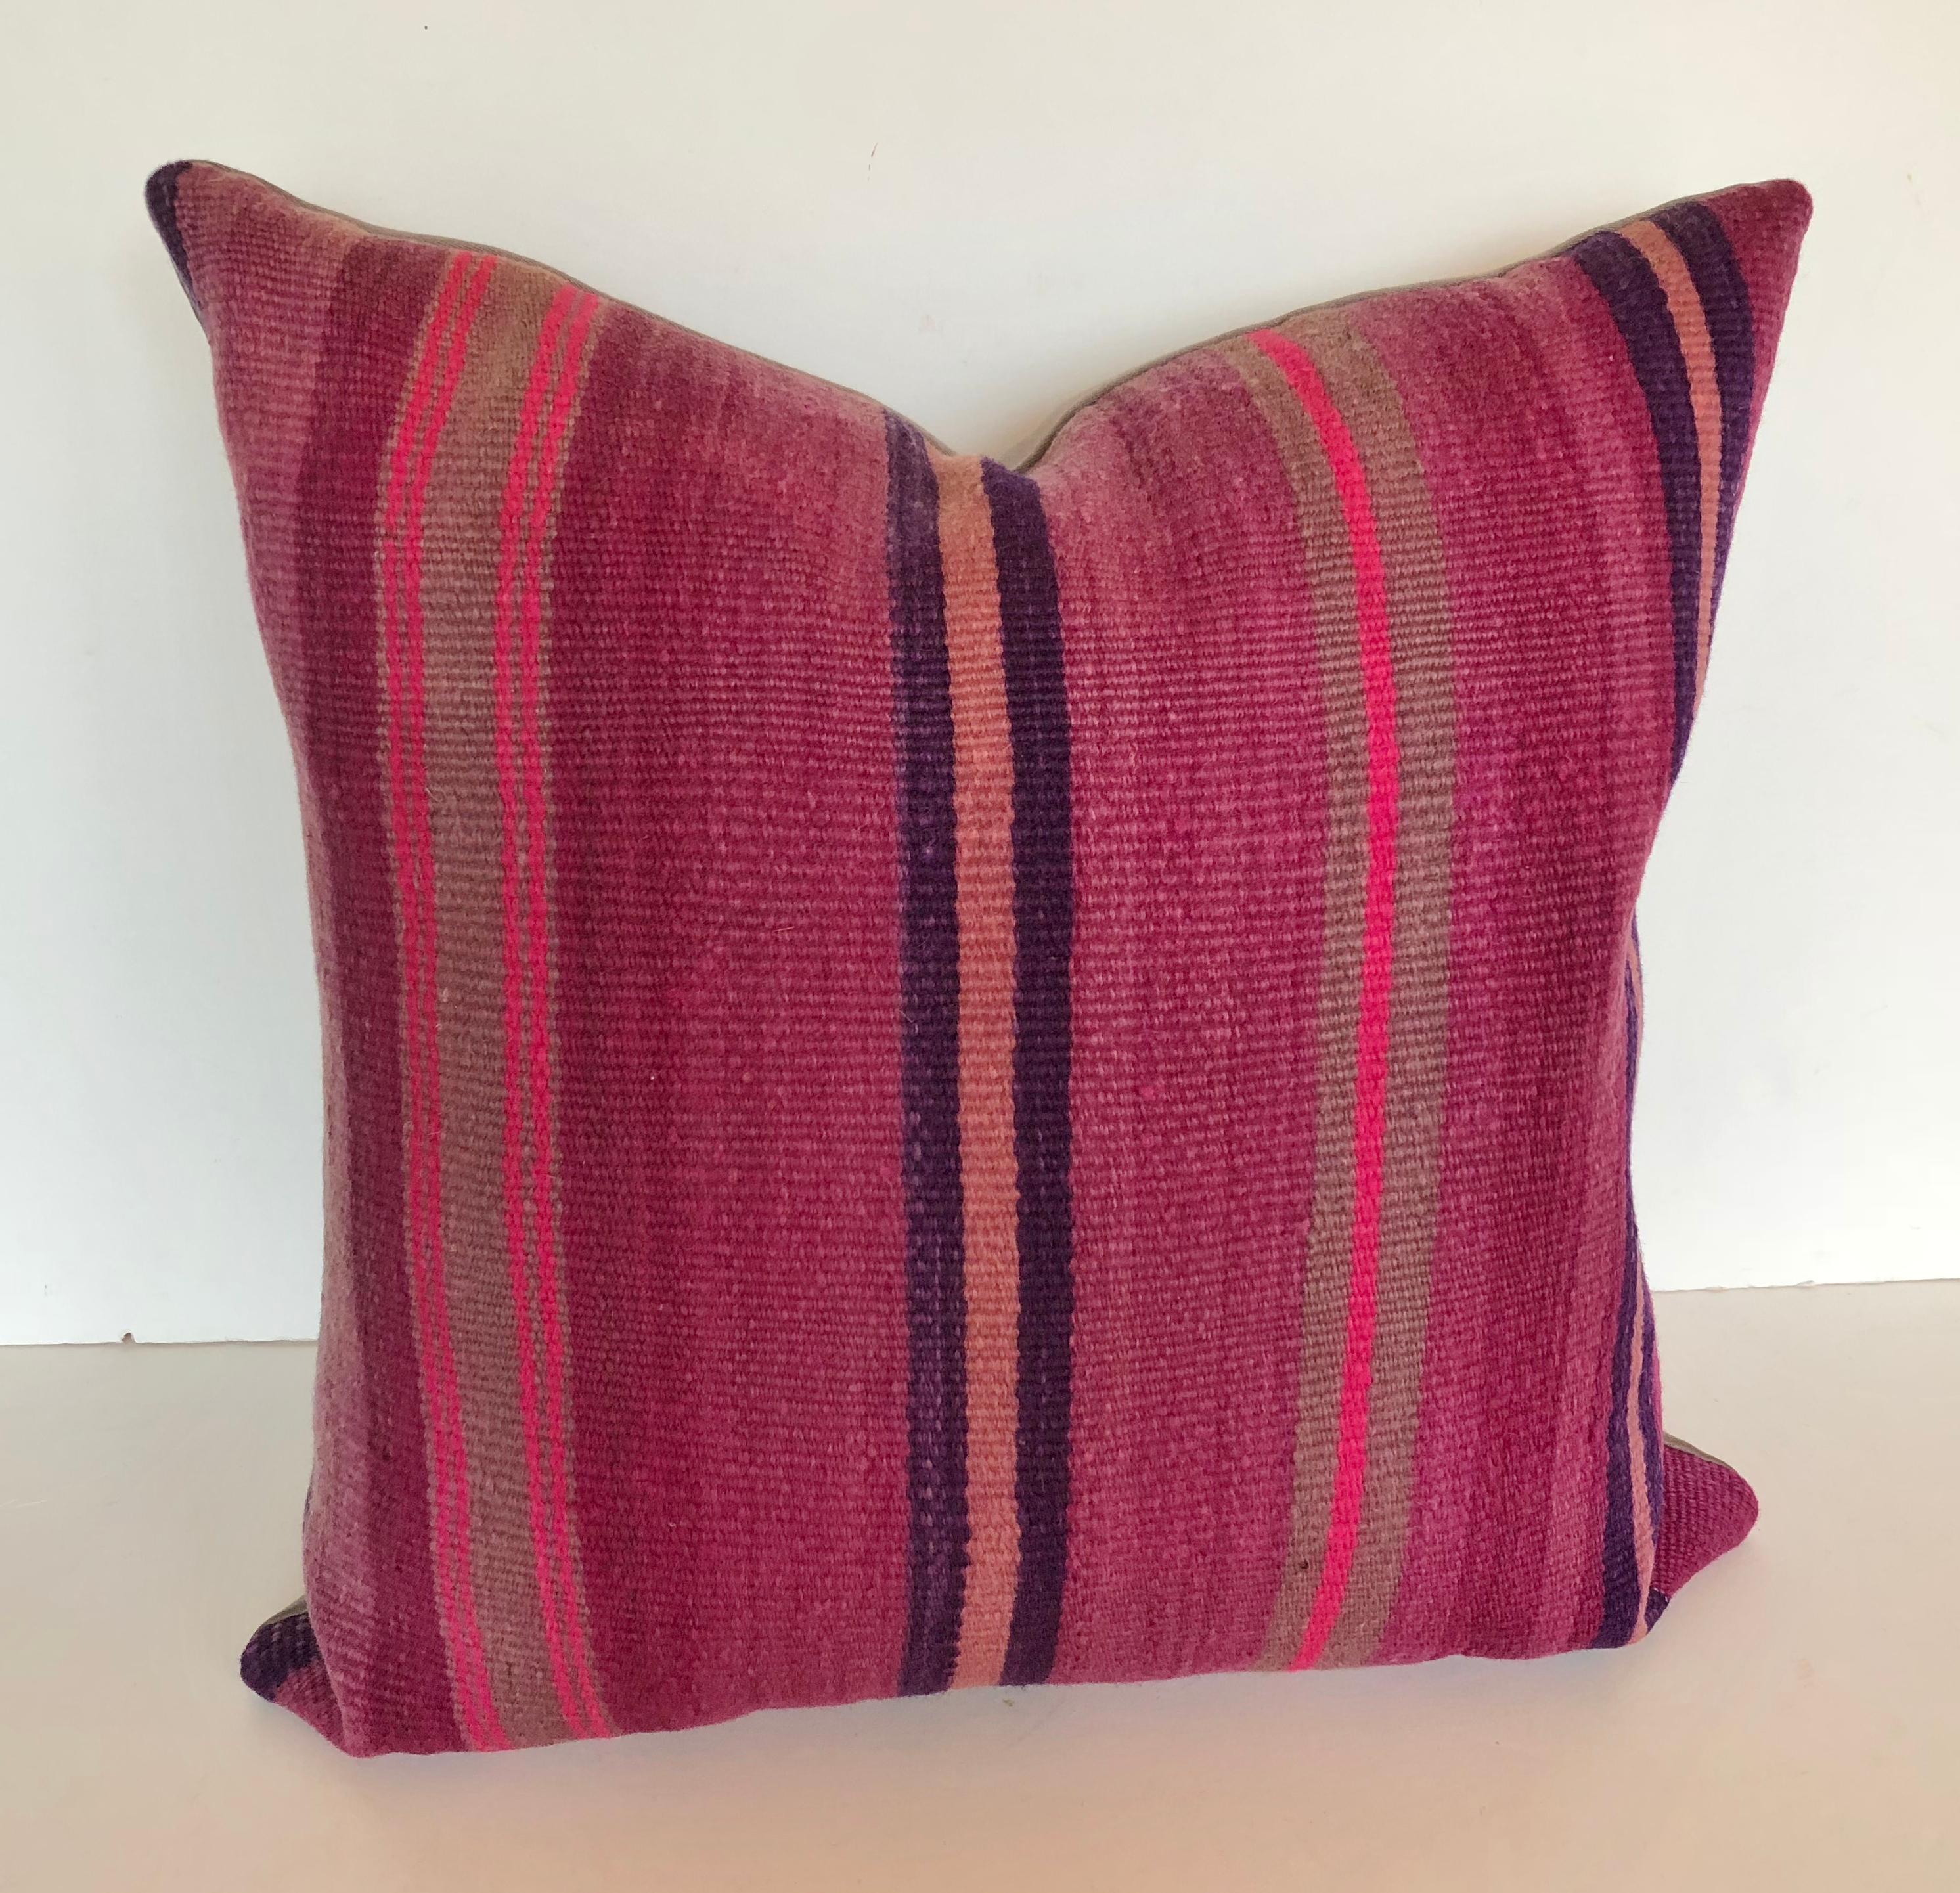 Custom pillow cut from a vintage Moroccan hand-loomed wool Berber rug from the Atlas Mountains. Wool is soft and lustrous with stripes in shades of purple. Pillow is backed in a wool blend, filled with an insert of 50/50 down and feathers and hand